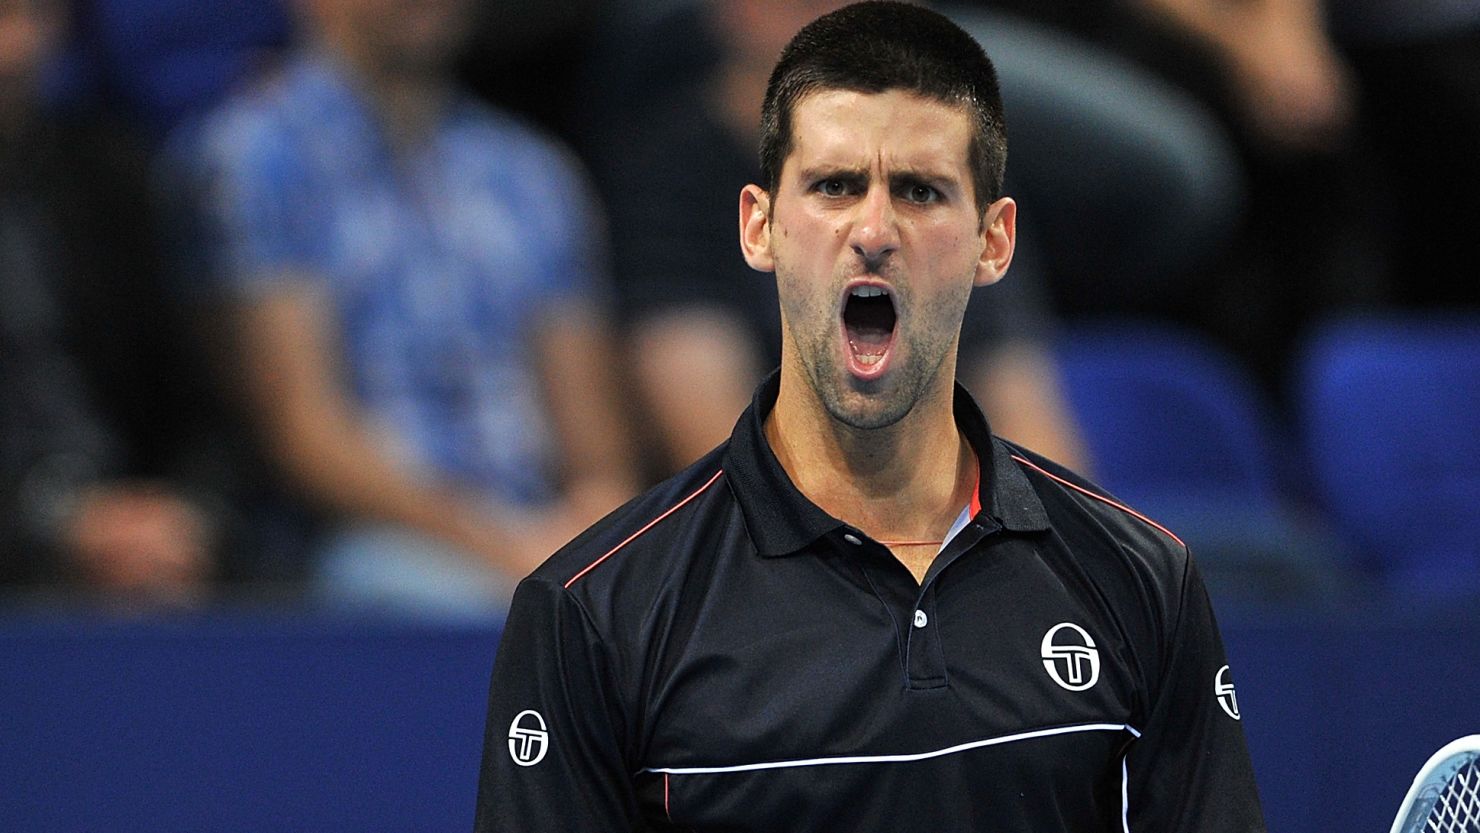 Novak Djokovic reacts to winning a point in his three-set victory over Marcos Baghdatis